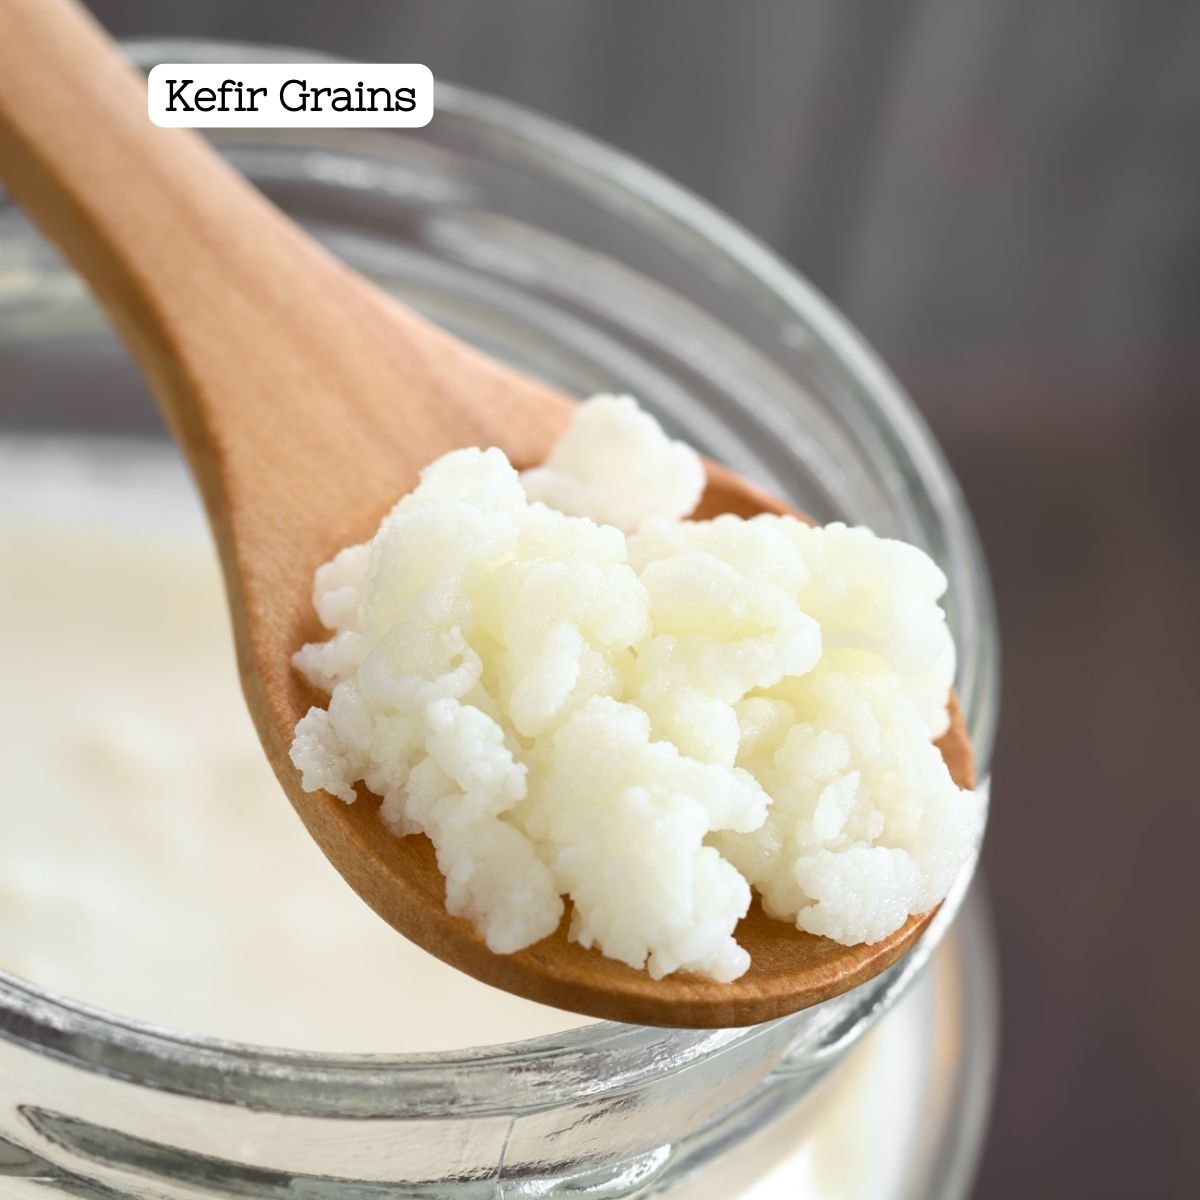 Kefir grains on a wooden spoon before being added to milk to ferment.